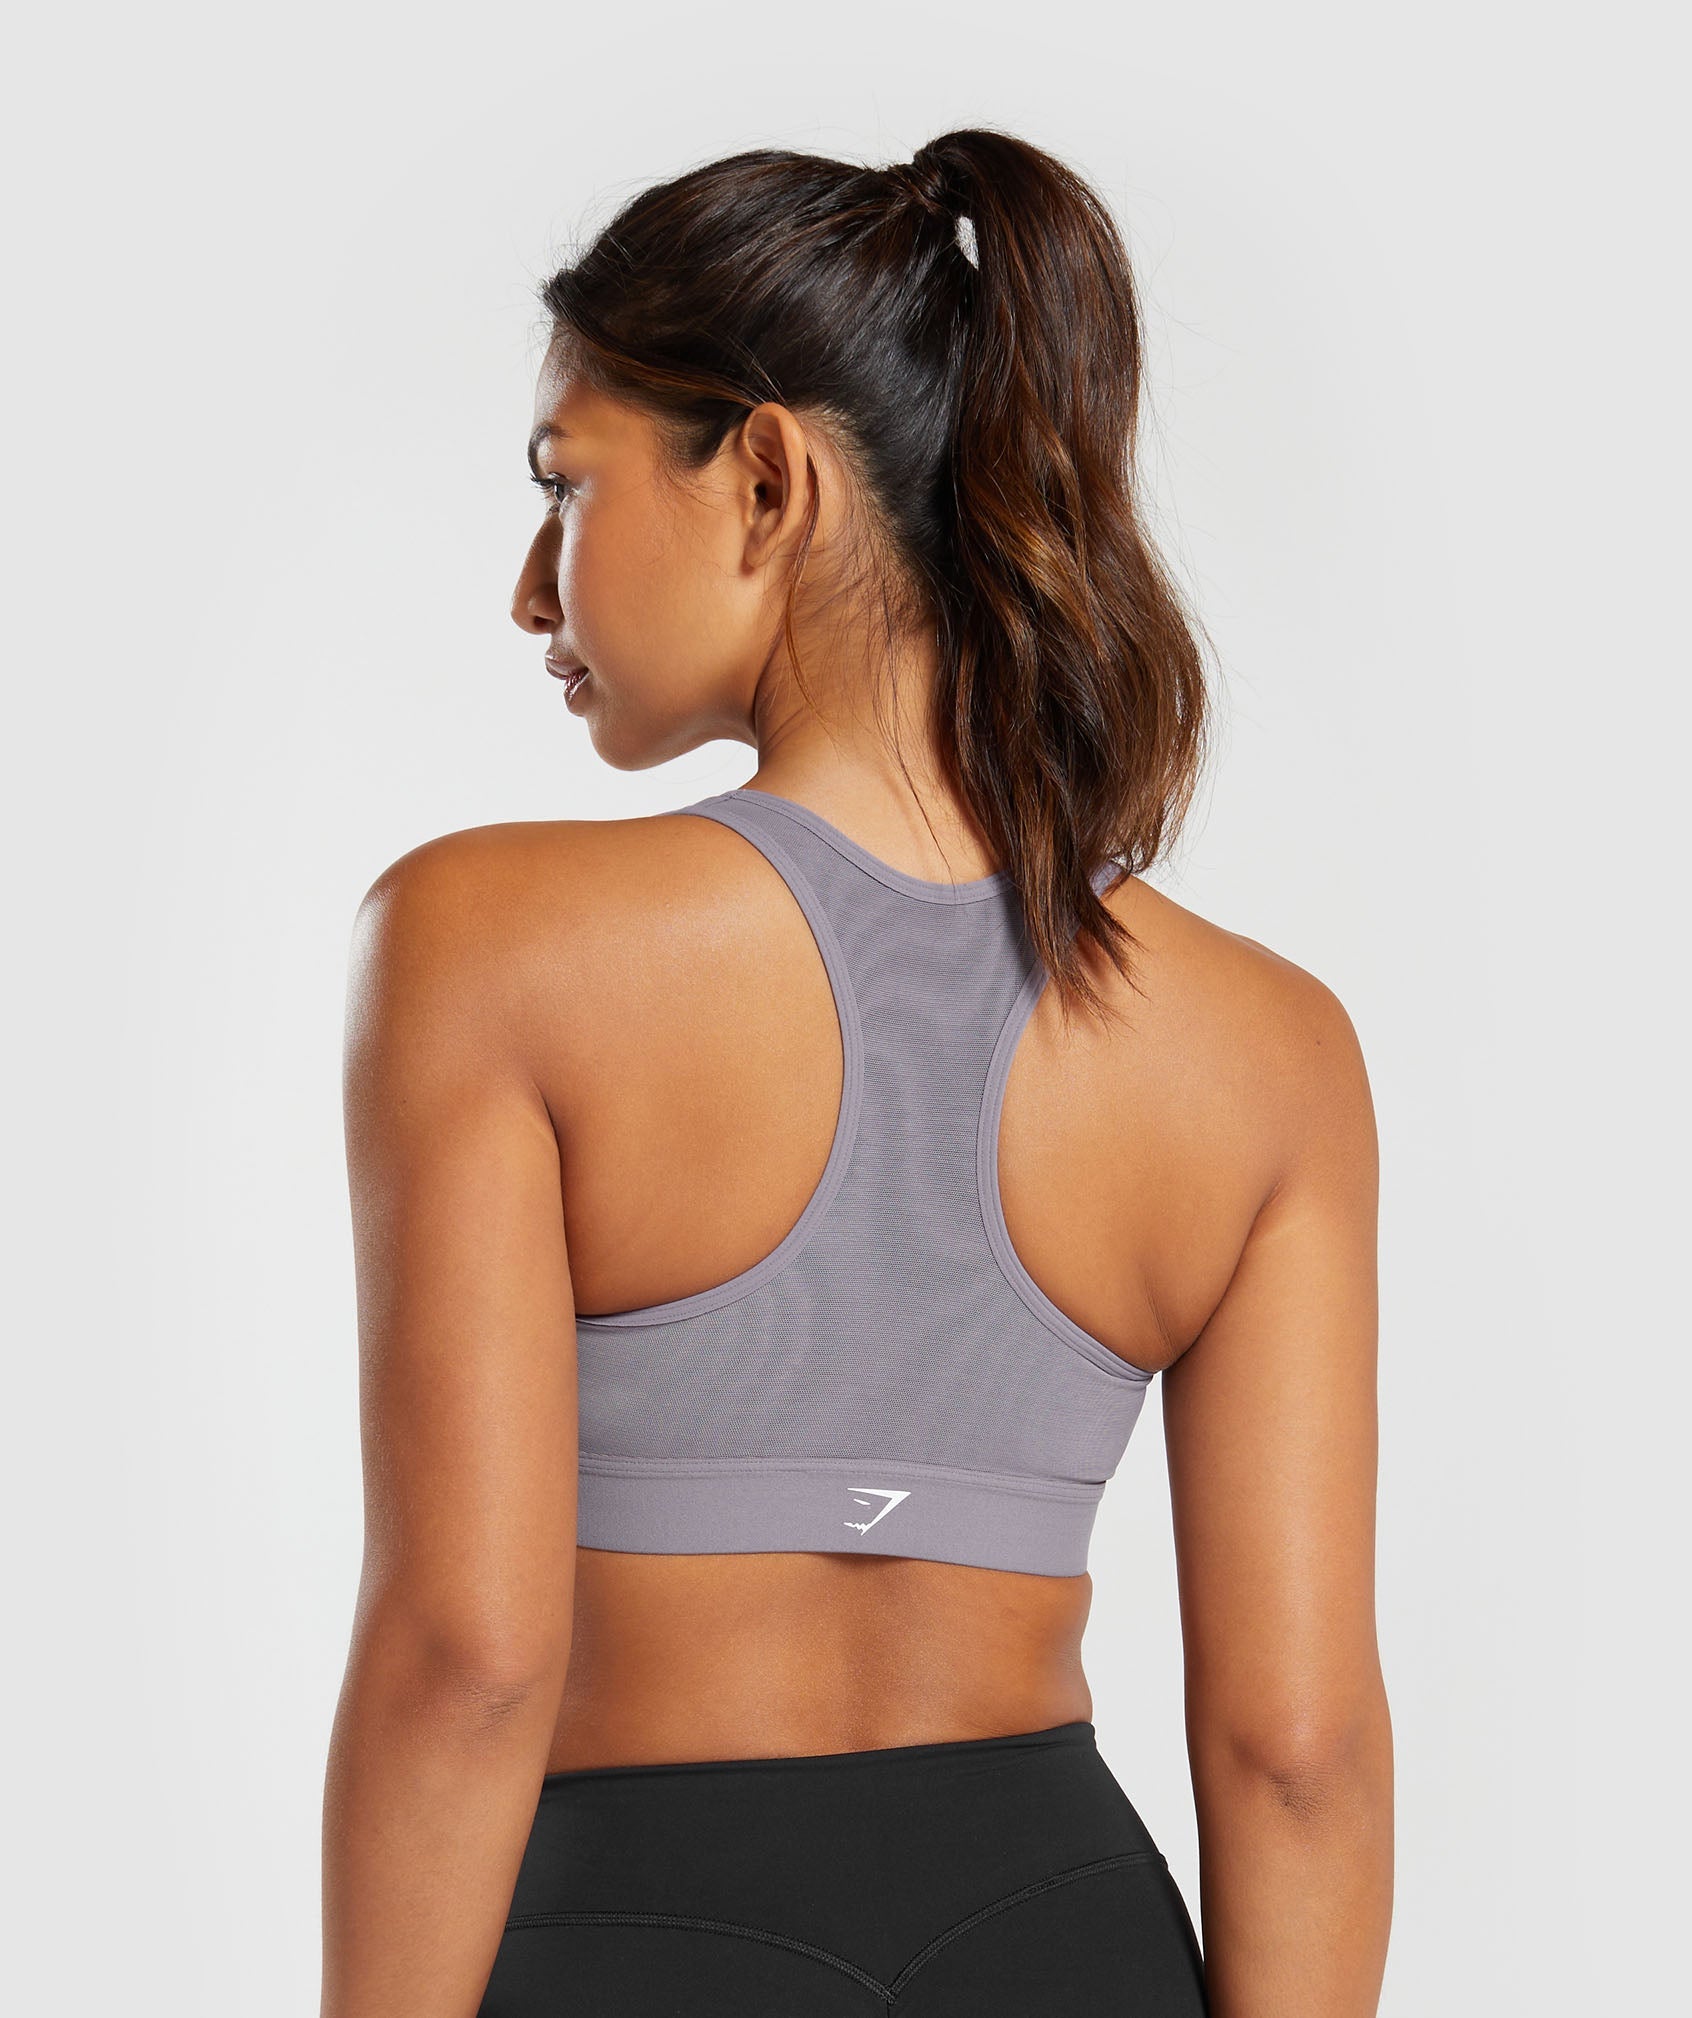 High Impact & High Support Sports Bras – Comfy & Supportive